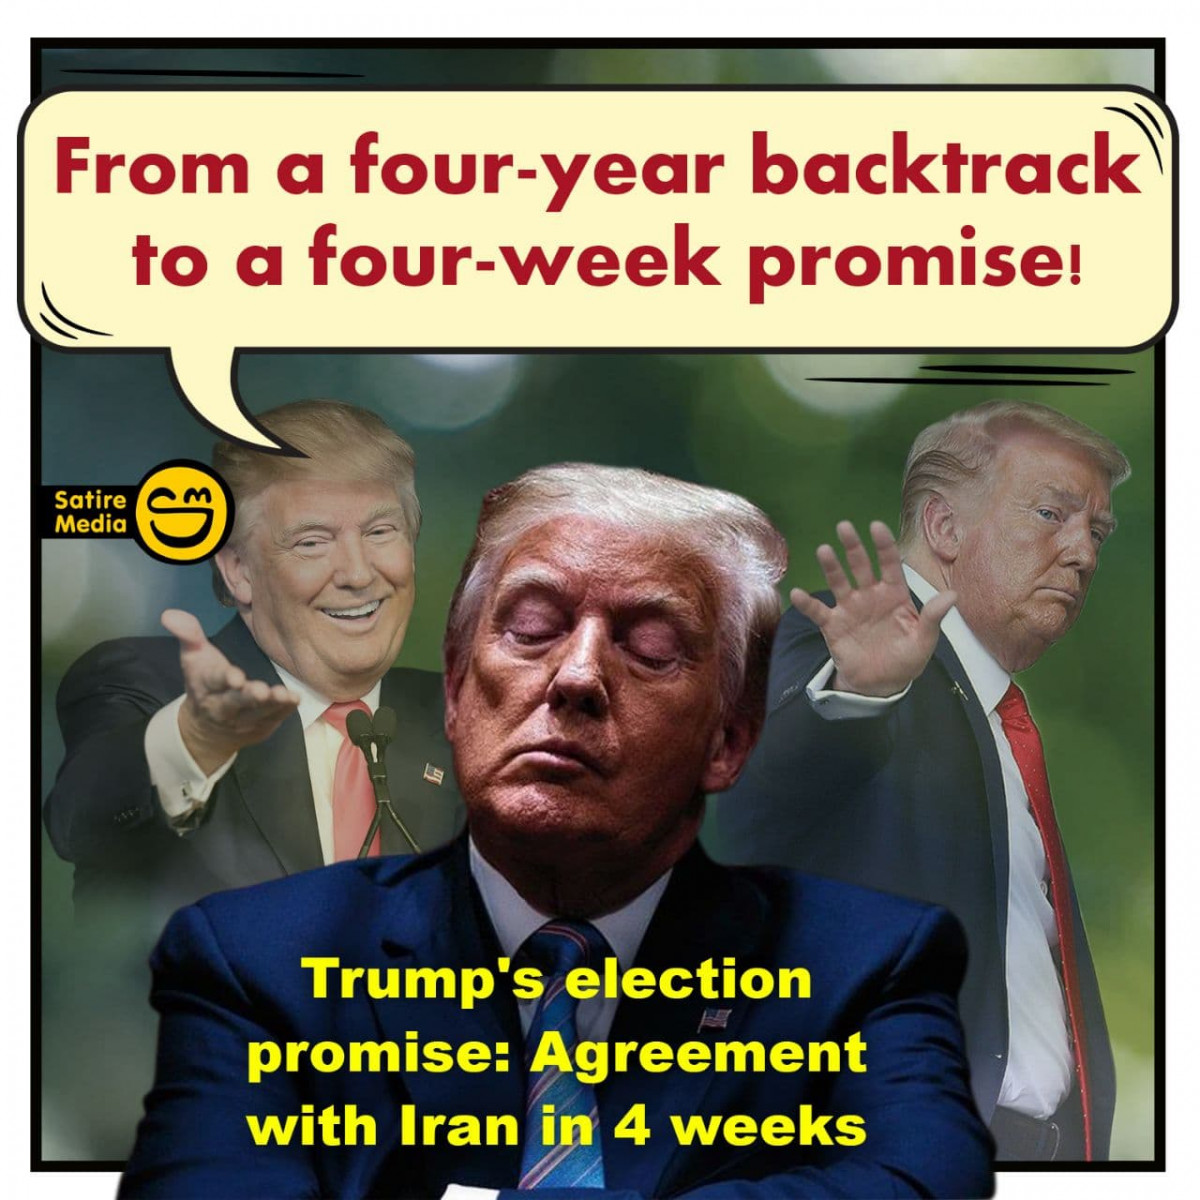 From a four-year backtrack to a four-week promise